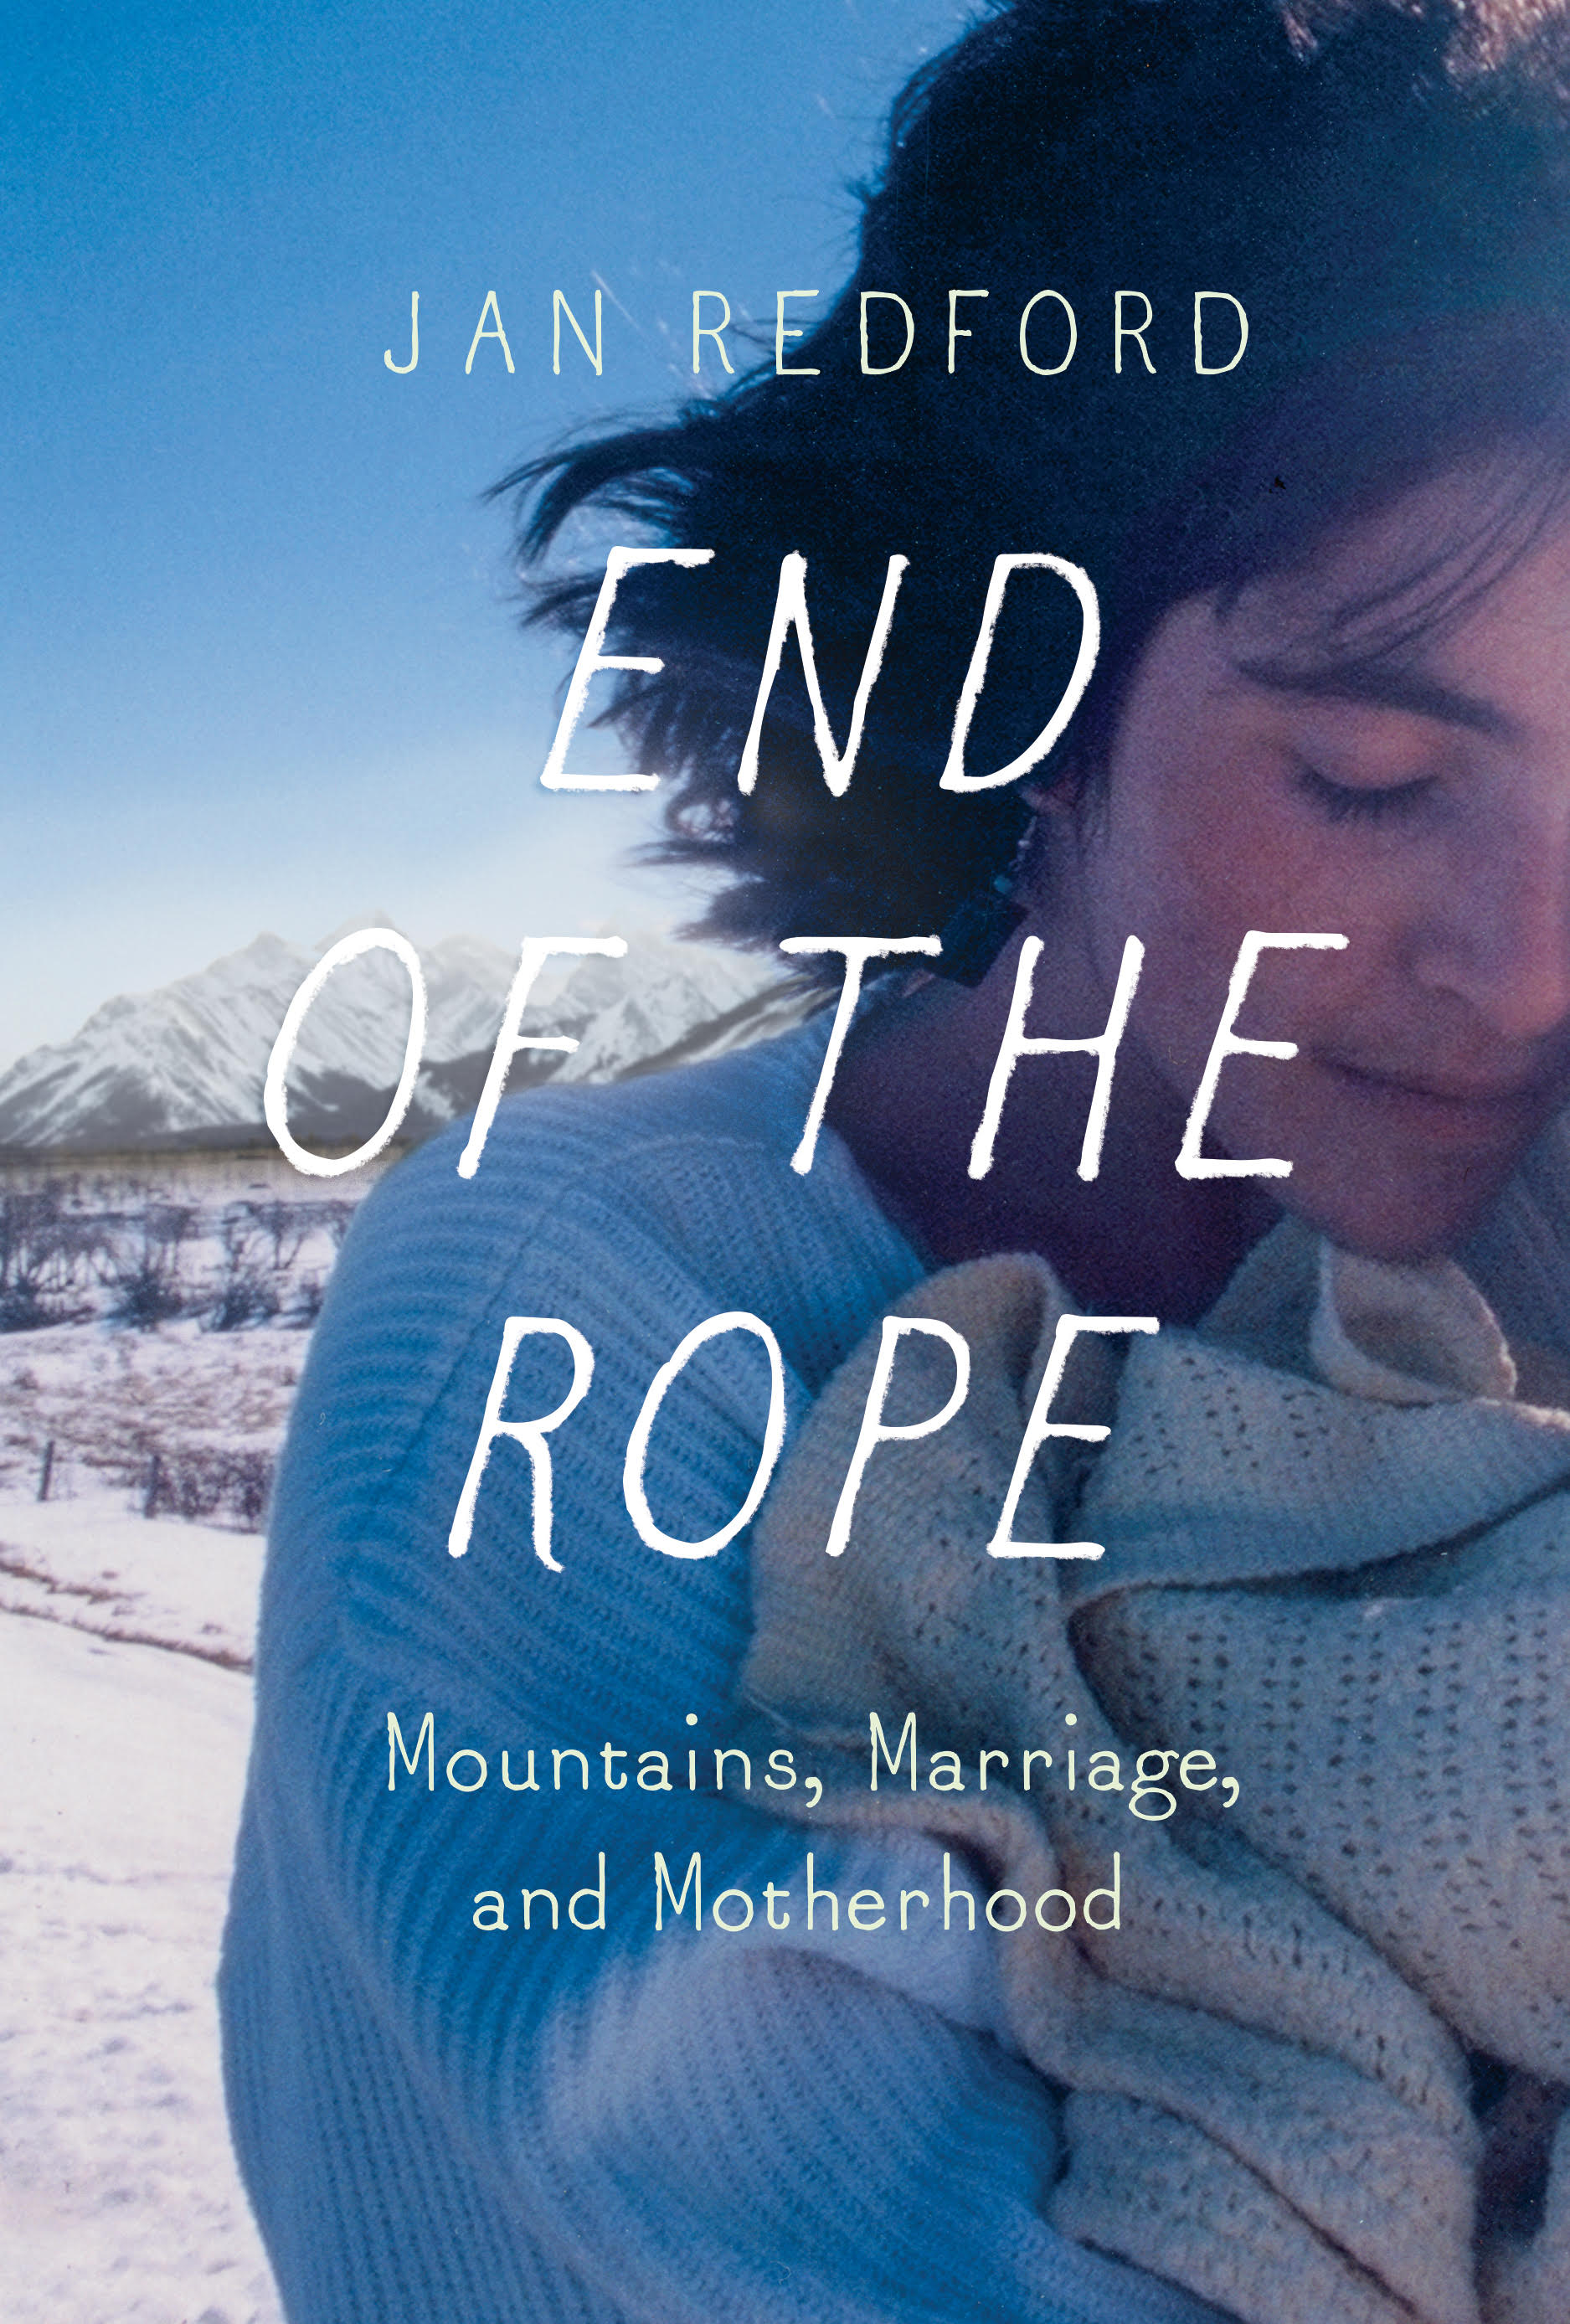 The Canadian cover for End of the Rope: Mountains, Marriage, and Motherhood by Jan Redford. Counterpoint Press, 2018.